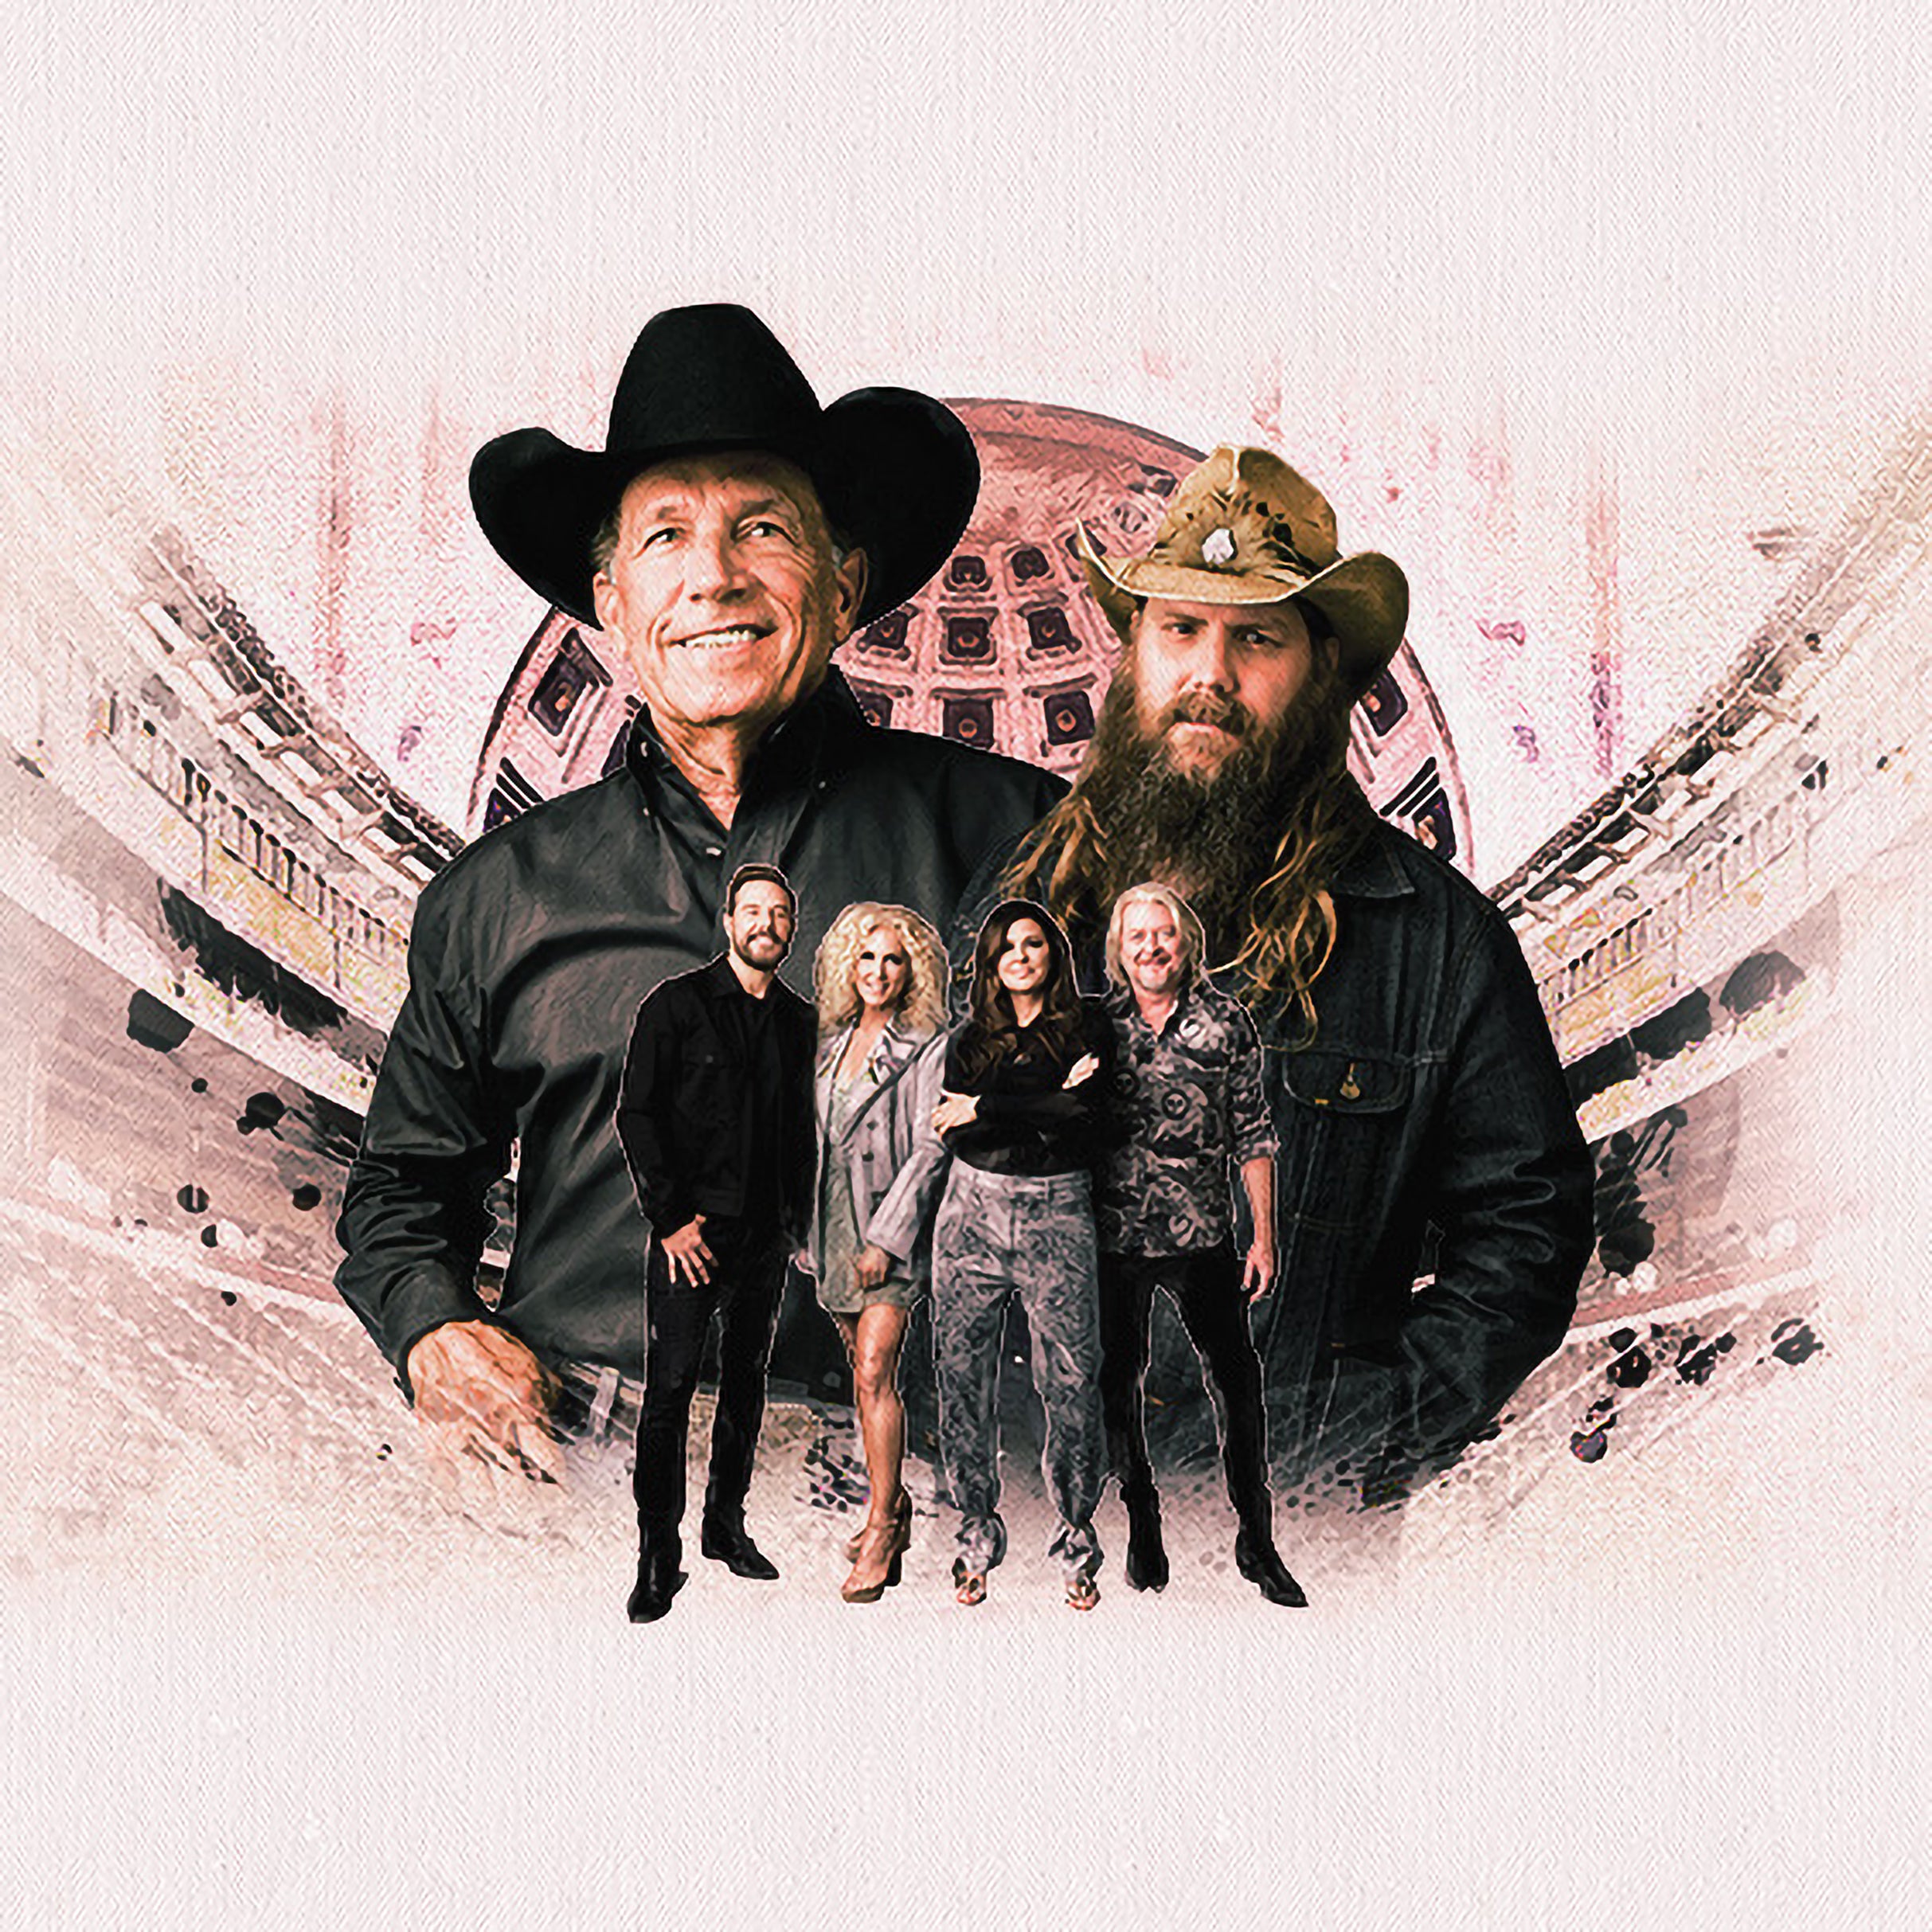 Buckeye Country Superfest starring George Strait w/ Chris Stapleton free presale listing for event tickets in Columbus, OH (Ohio Stadium)